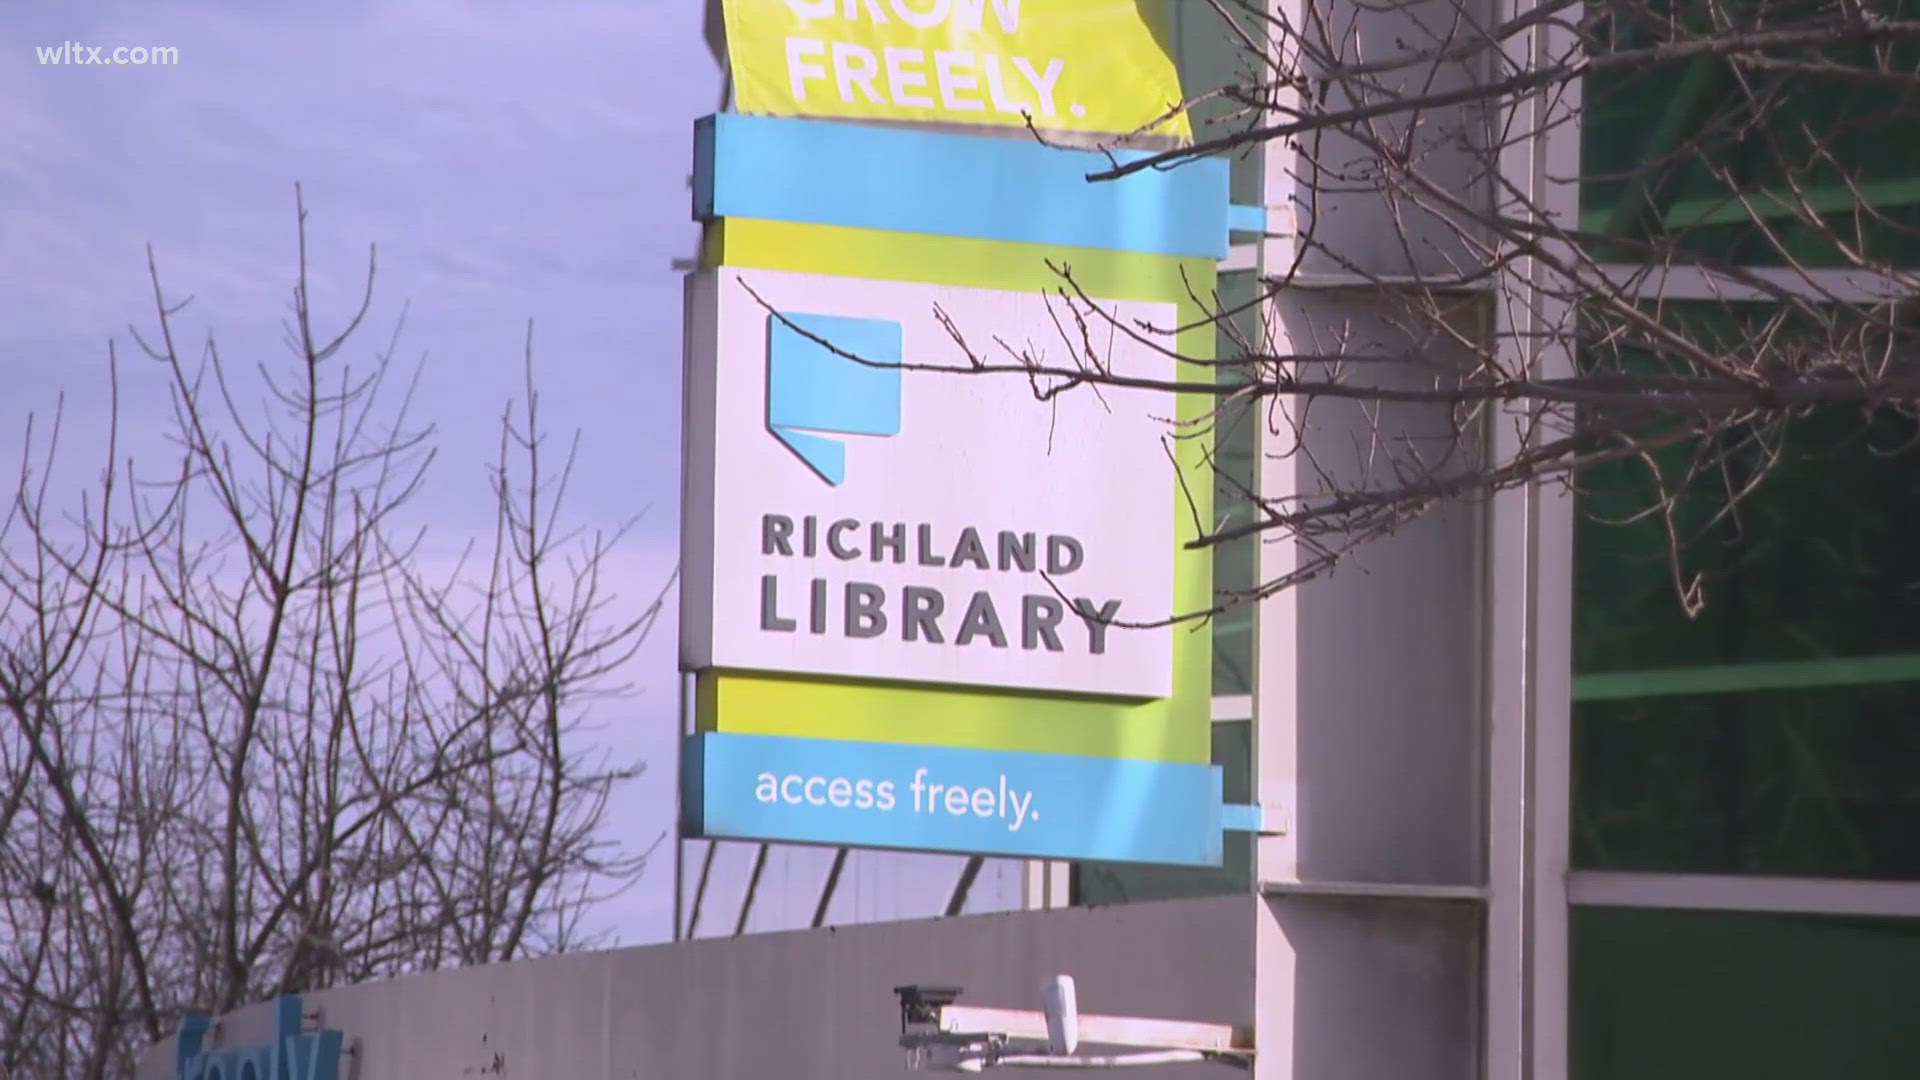 Meg Oliver with CBS News shows us how Richland Library is one of several across the country that is writing the book on innovation.